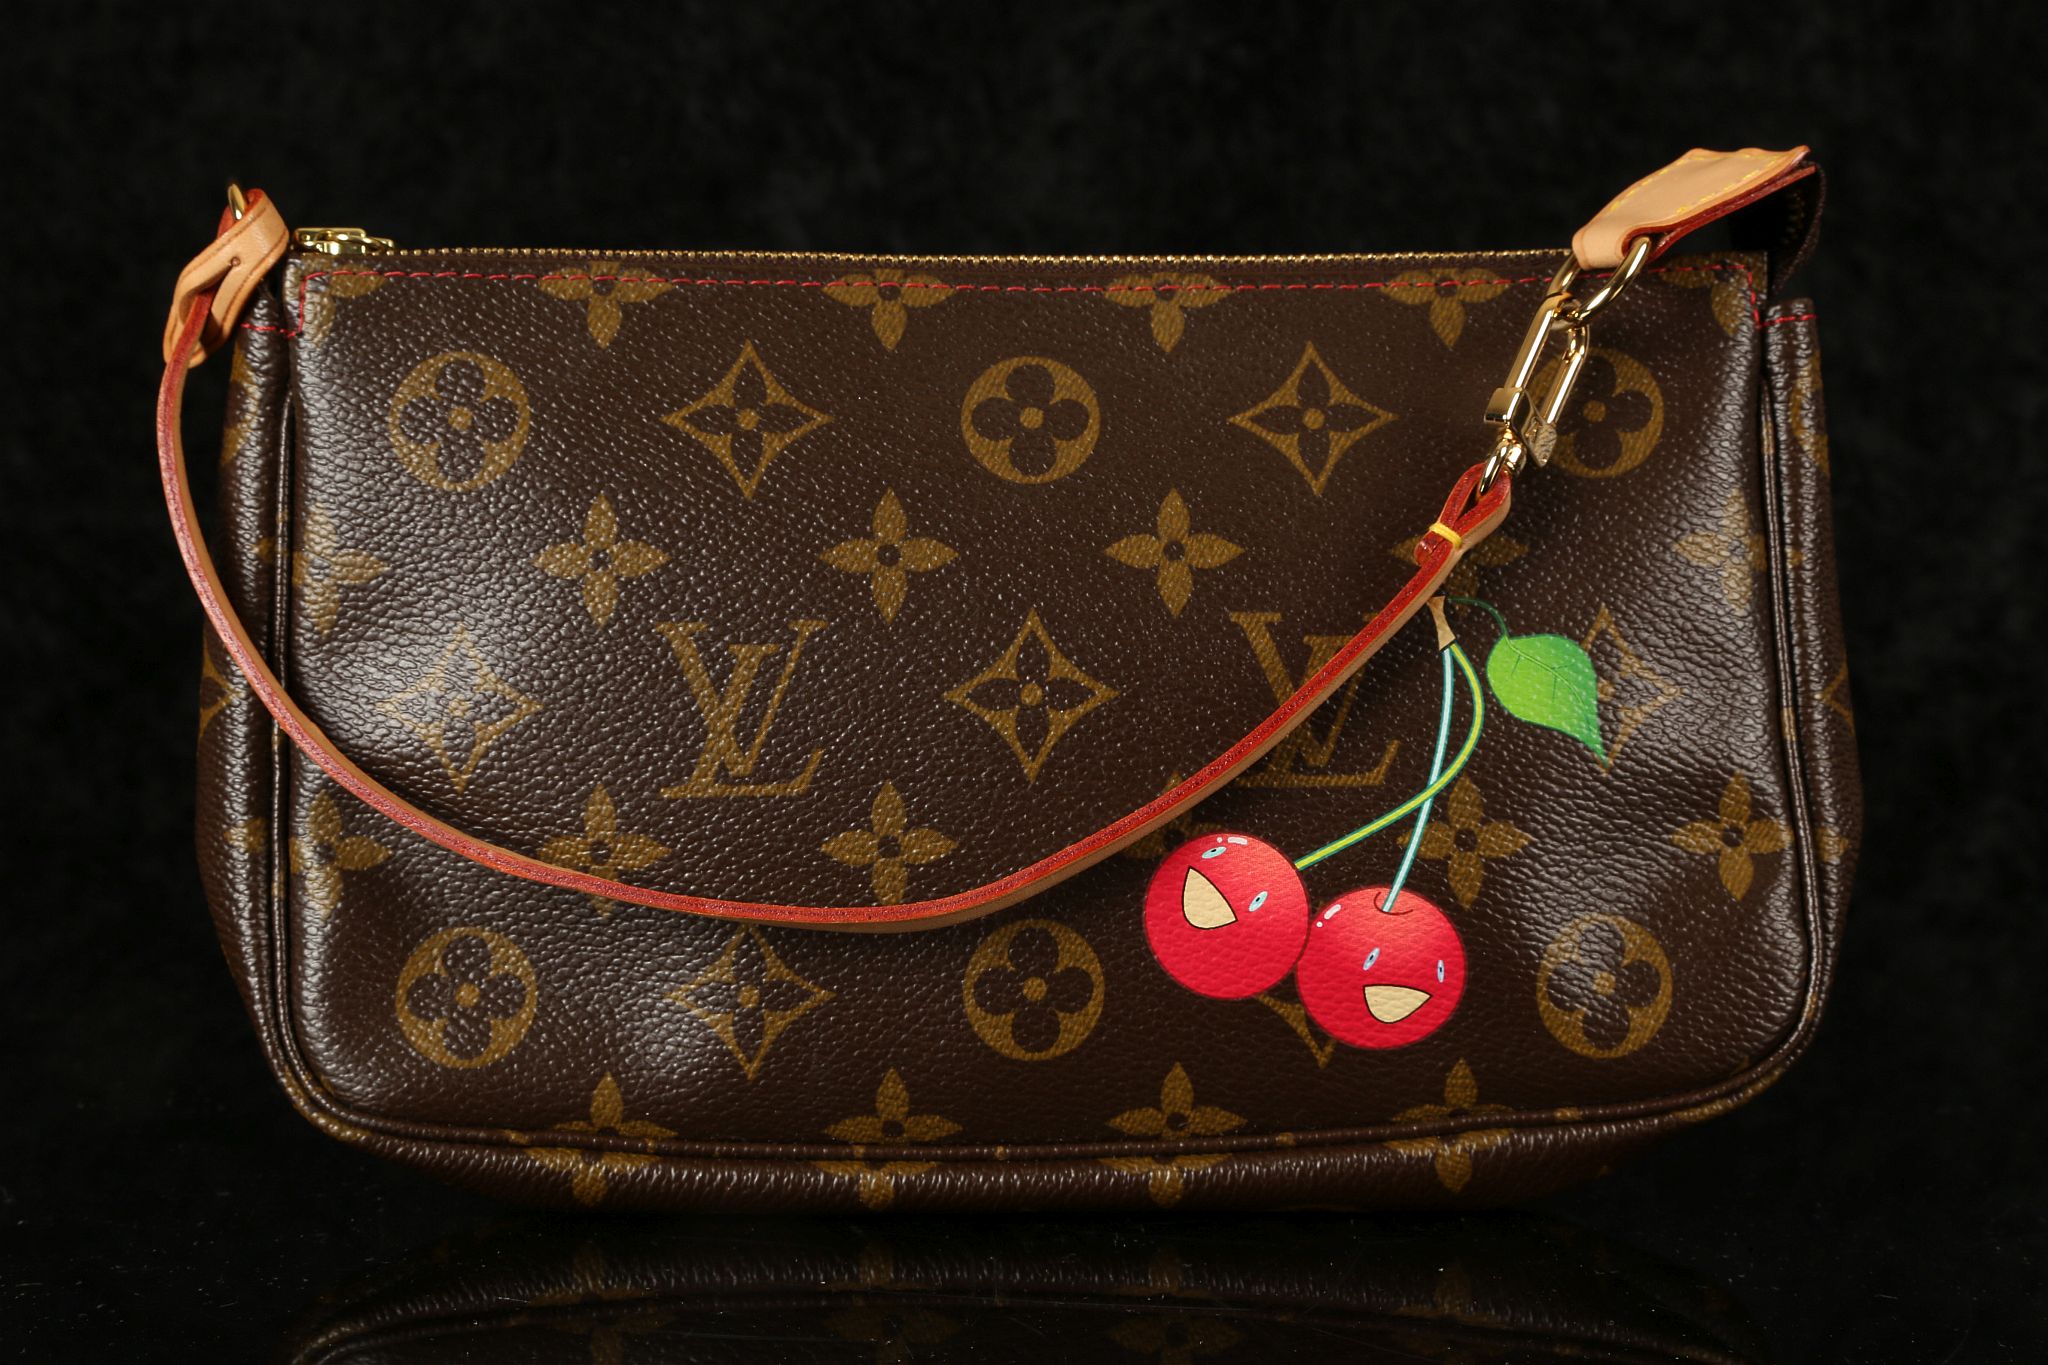 LOUIS VUITTON CERISES POCHETTE, date code for 2005, monogram canvas with leather trim and printed - Image 2 of 10